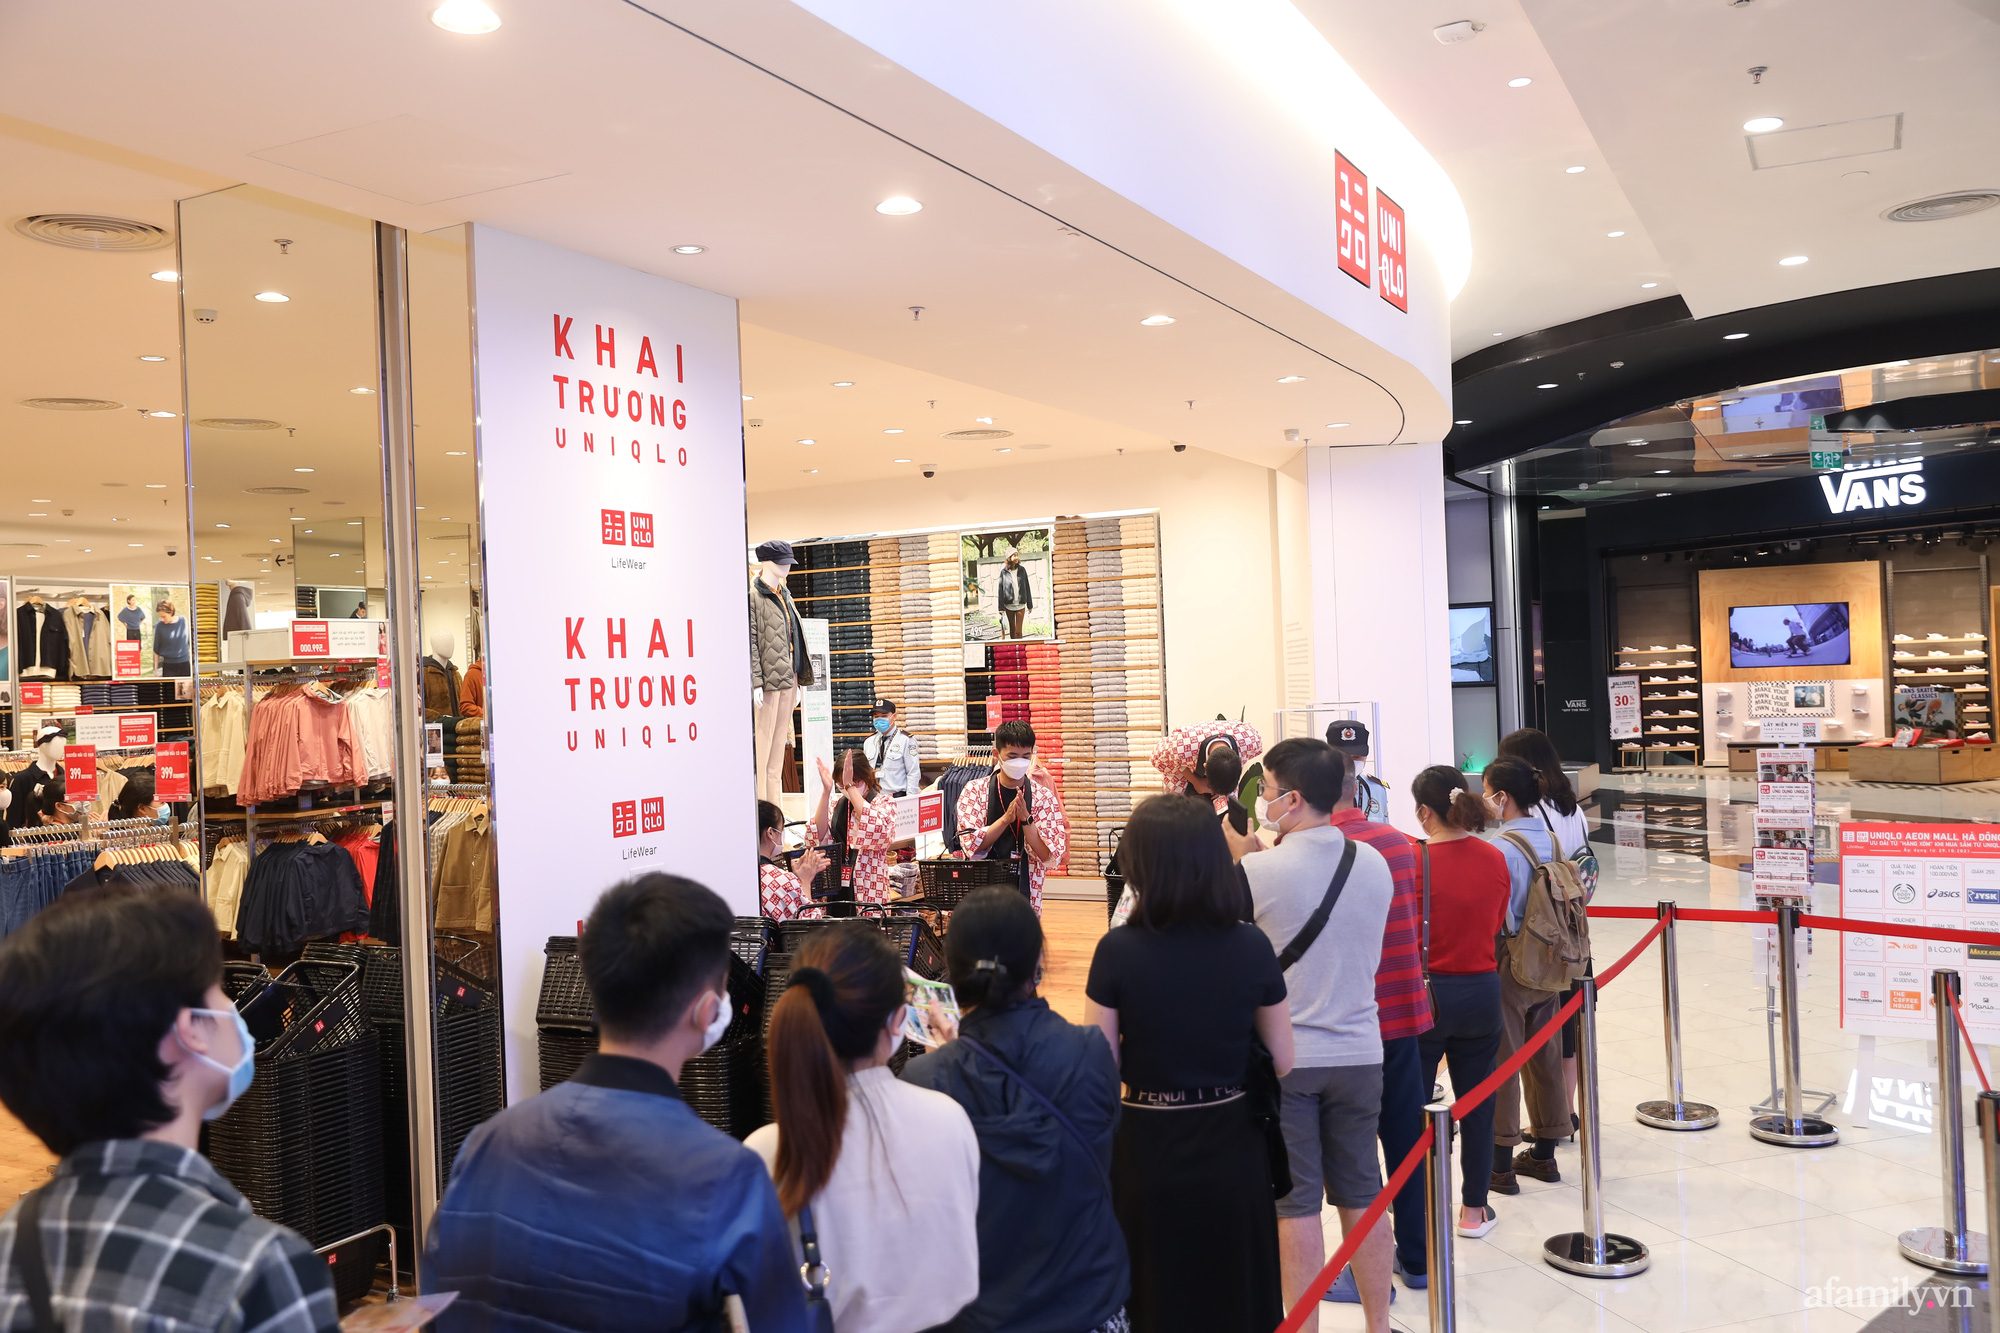 More than 750 lineup for UNIQLOs second WA store  Shopping Centre News